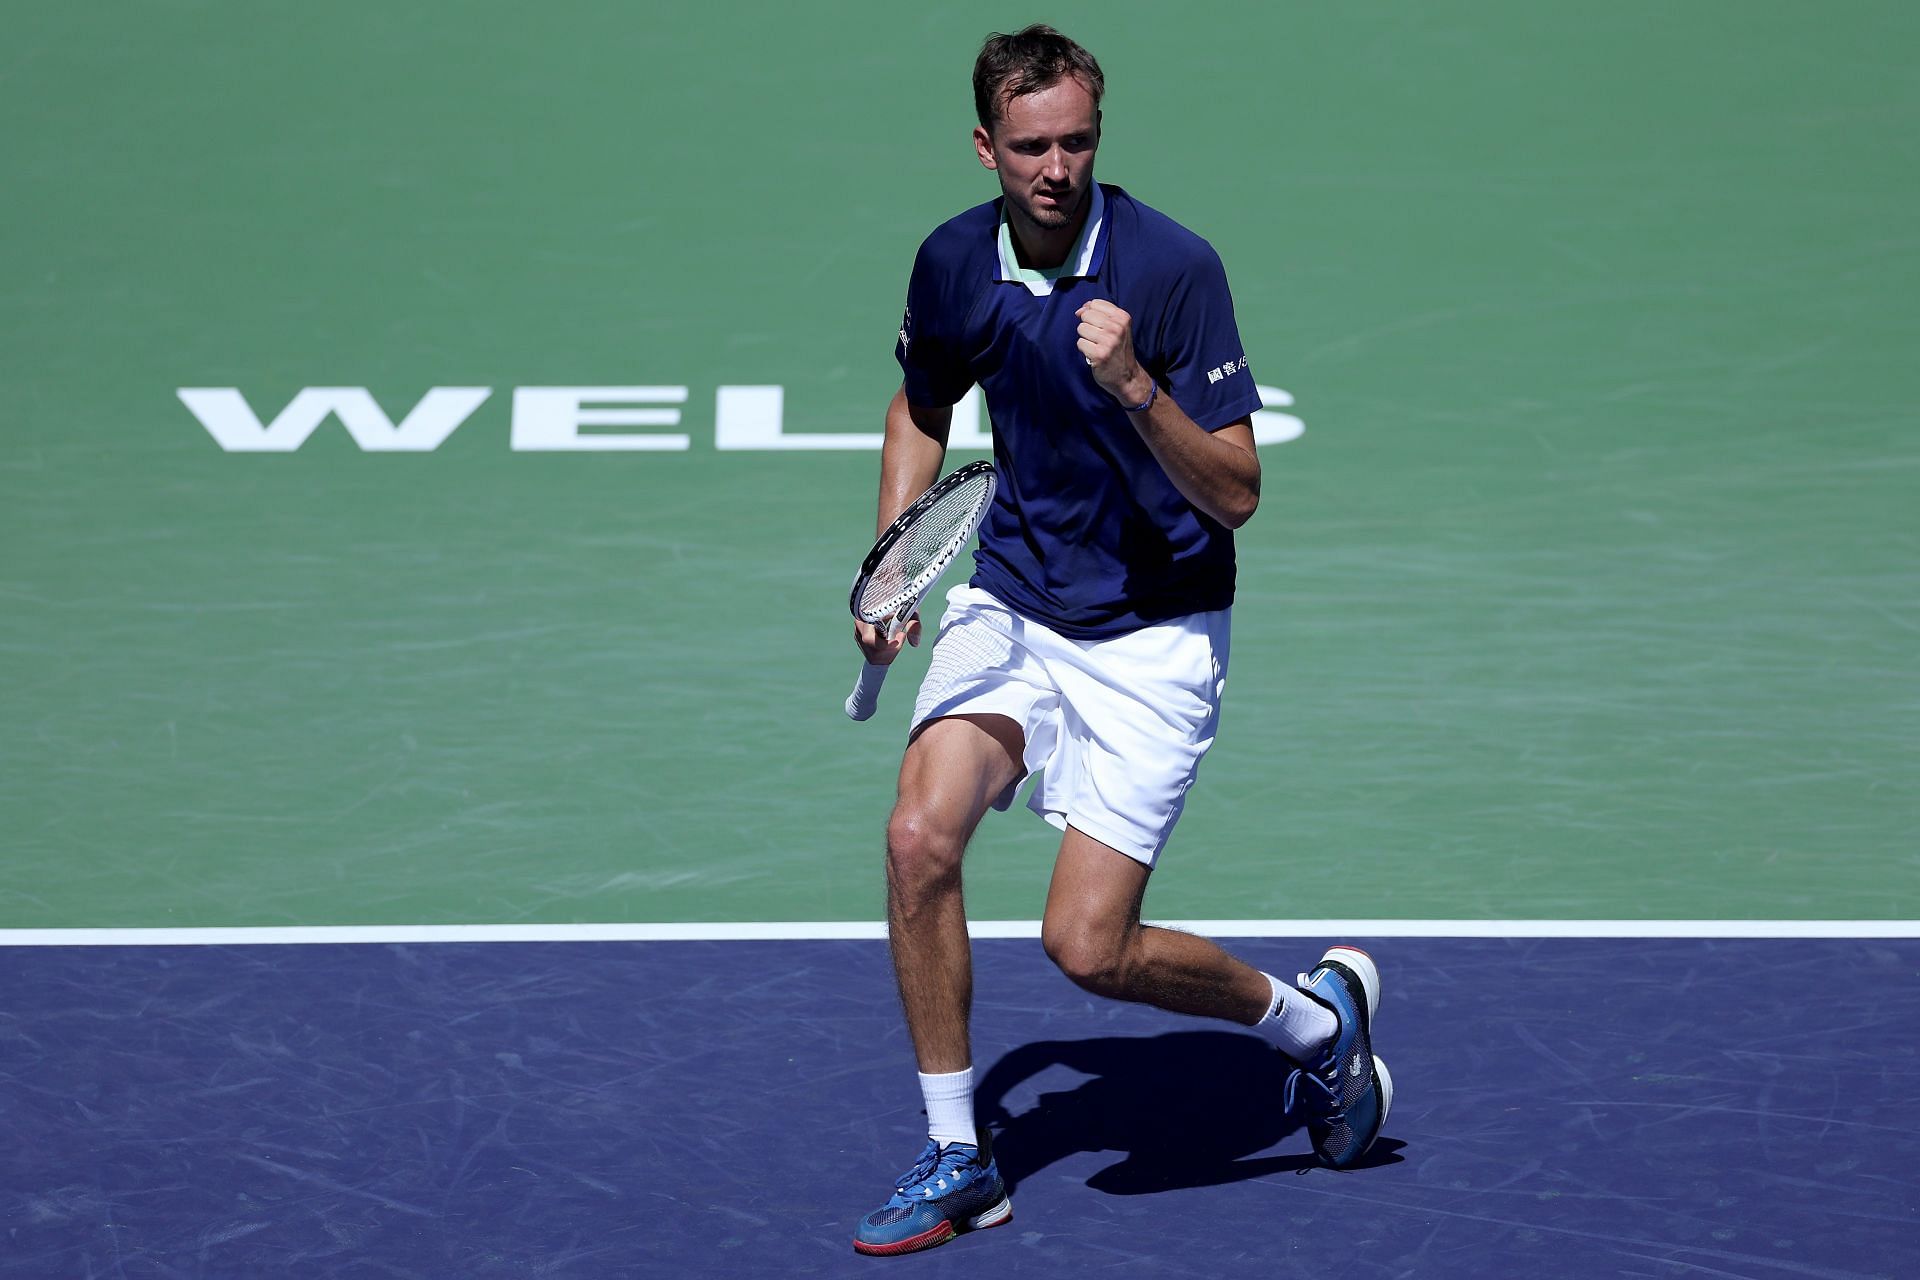 Daniil Medvedev won his first title of 2022 at Los Cabos